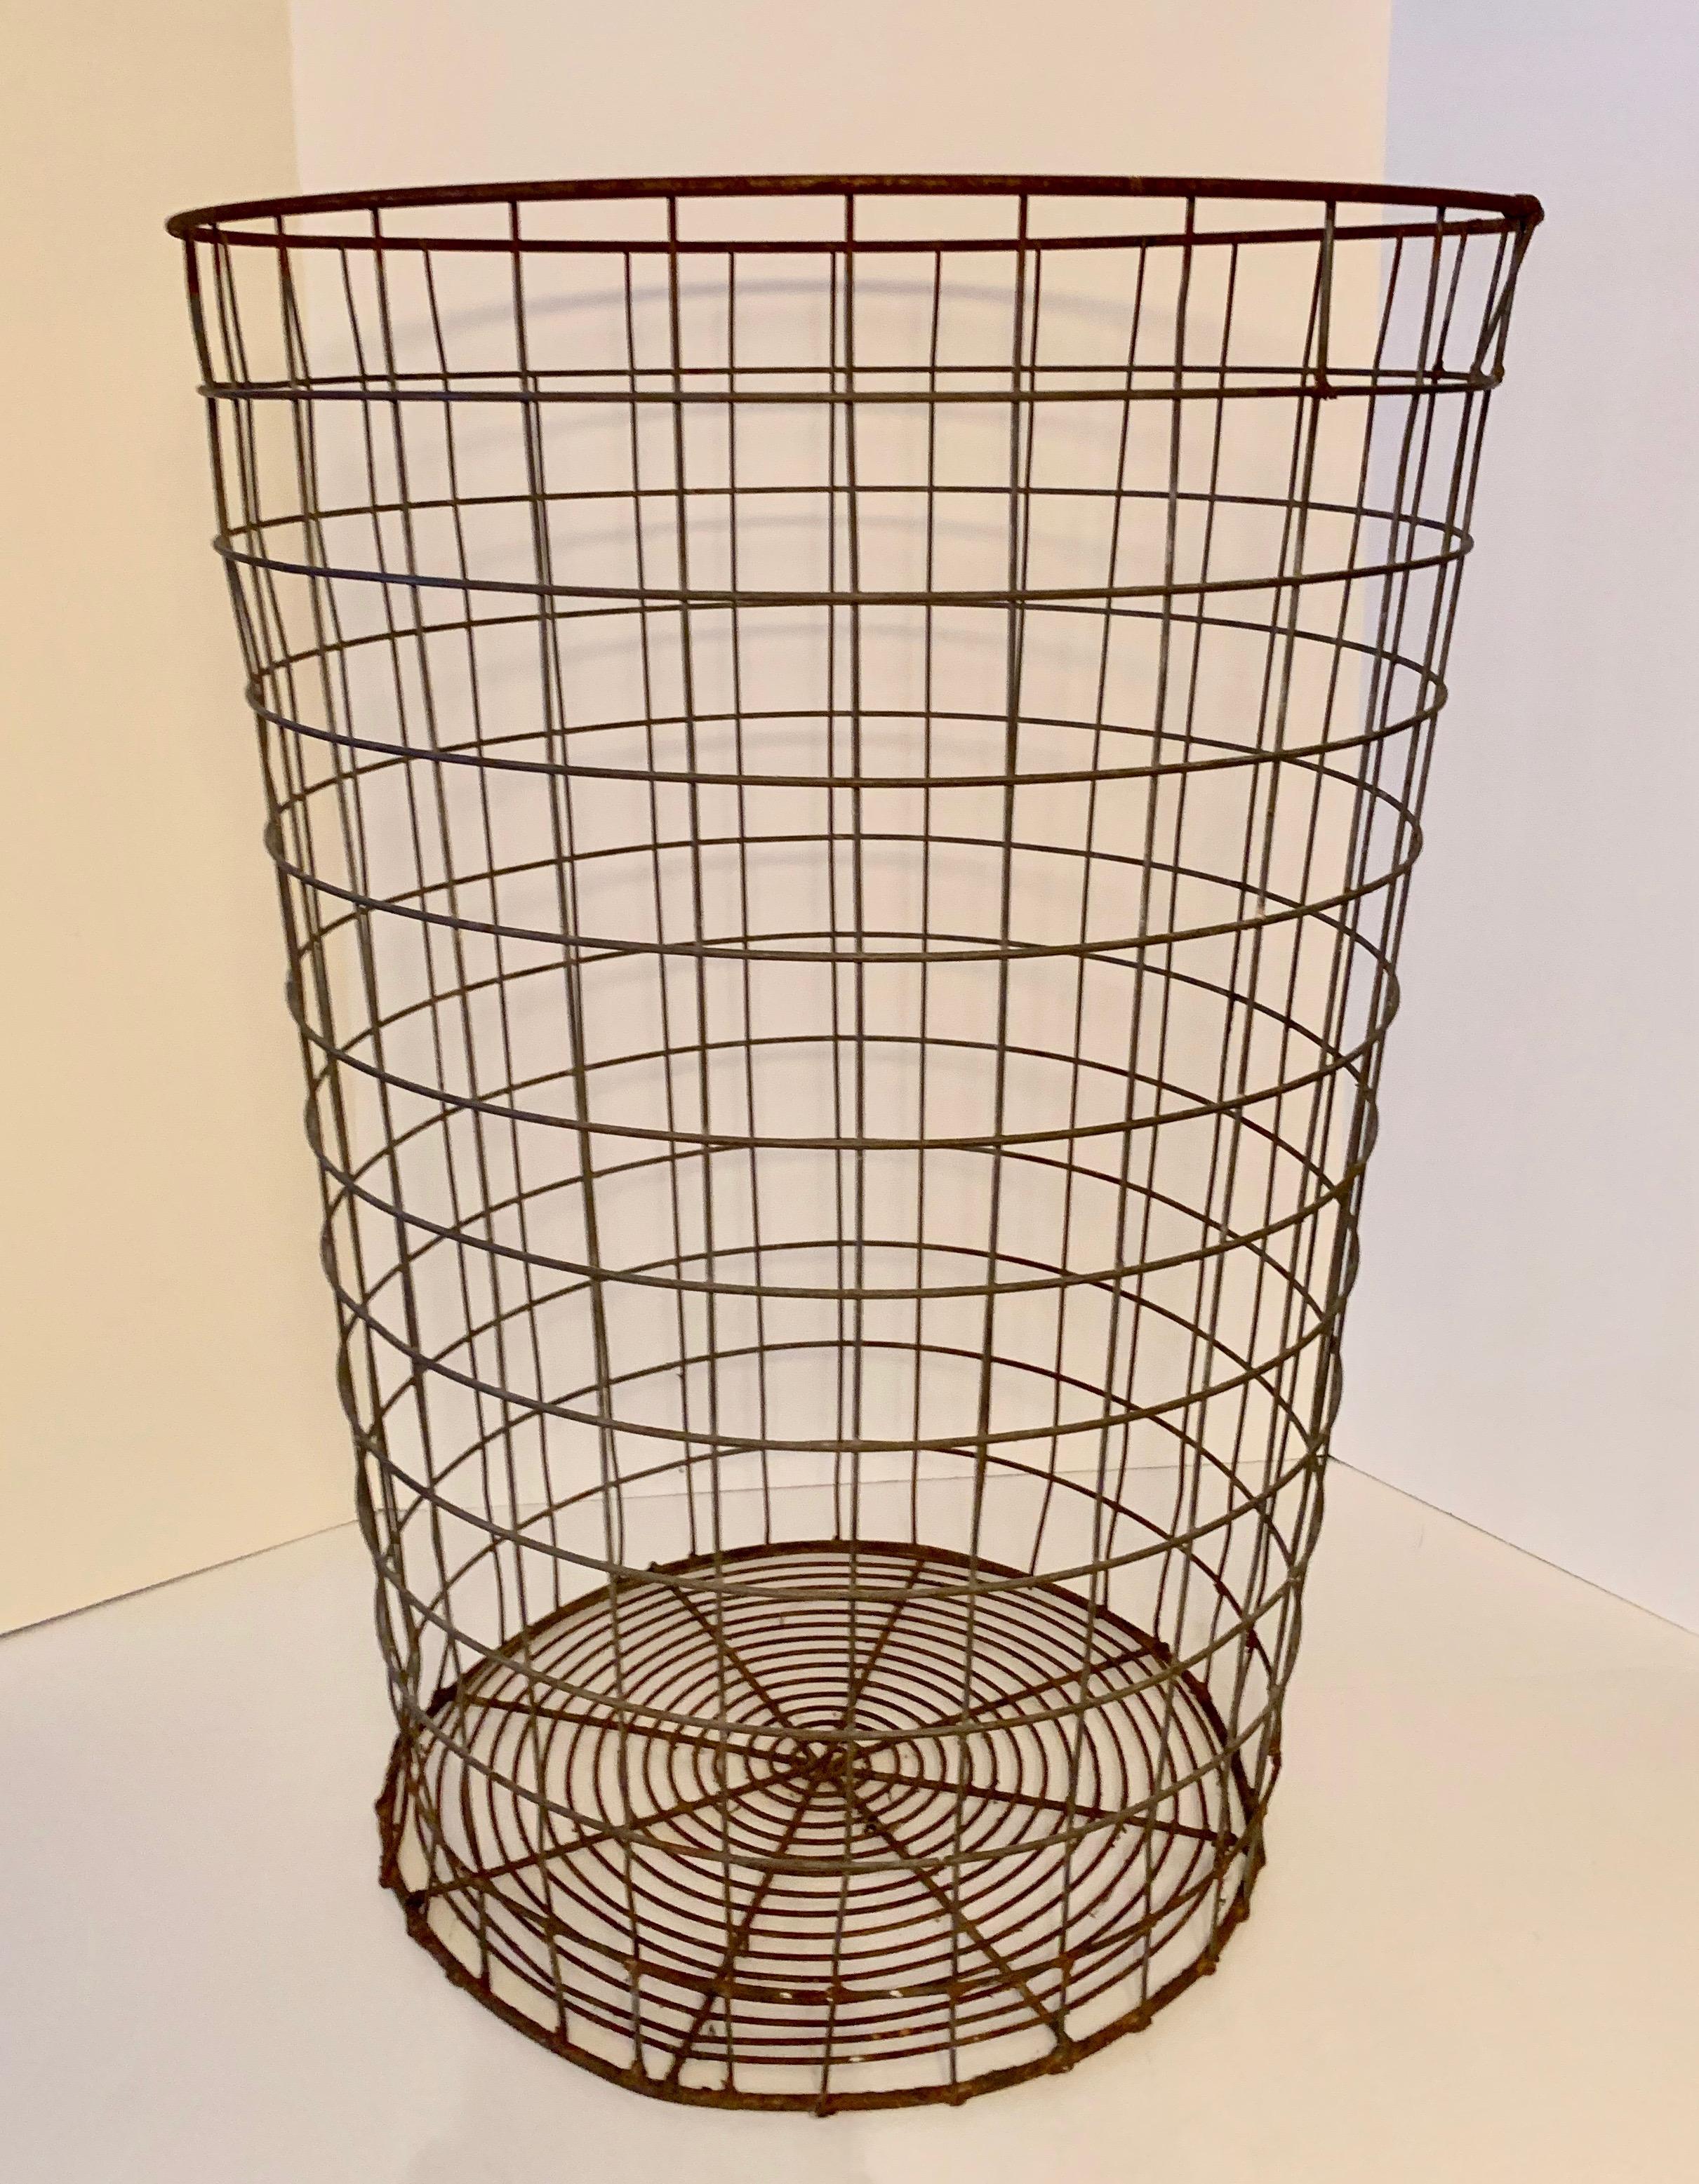 Wire trash can - Industrial and practical, yet artistic and architectural - the can will hold anything from trash to rolled drawings, laundry, or multiples of balls or sports pieces. We would also recommend powder coating or plating the piece to